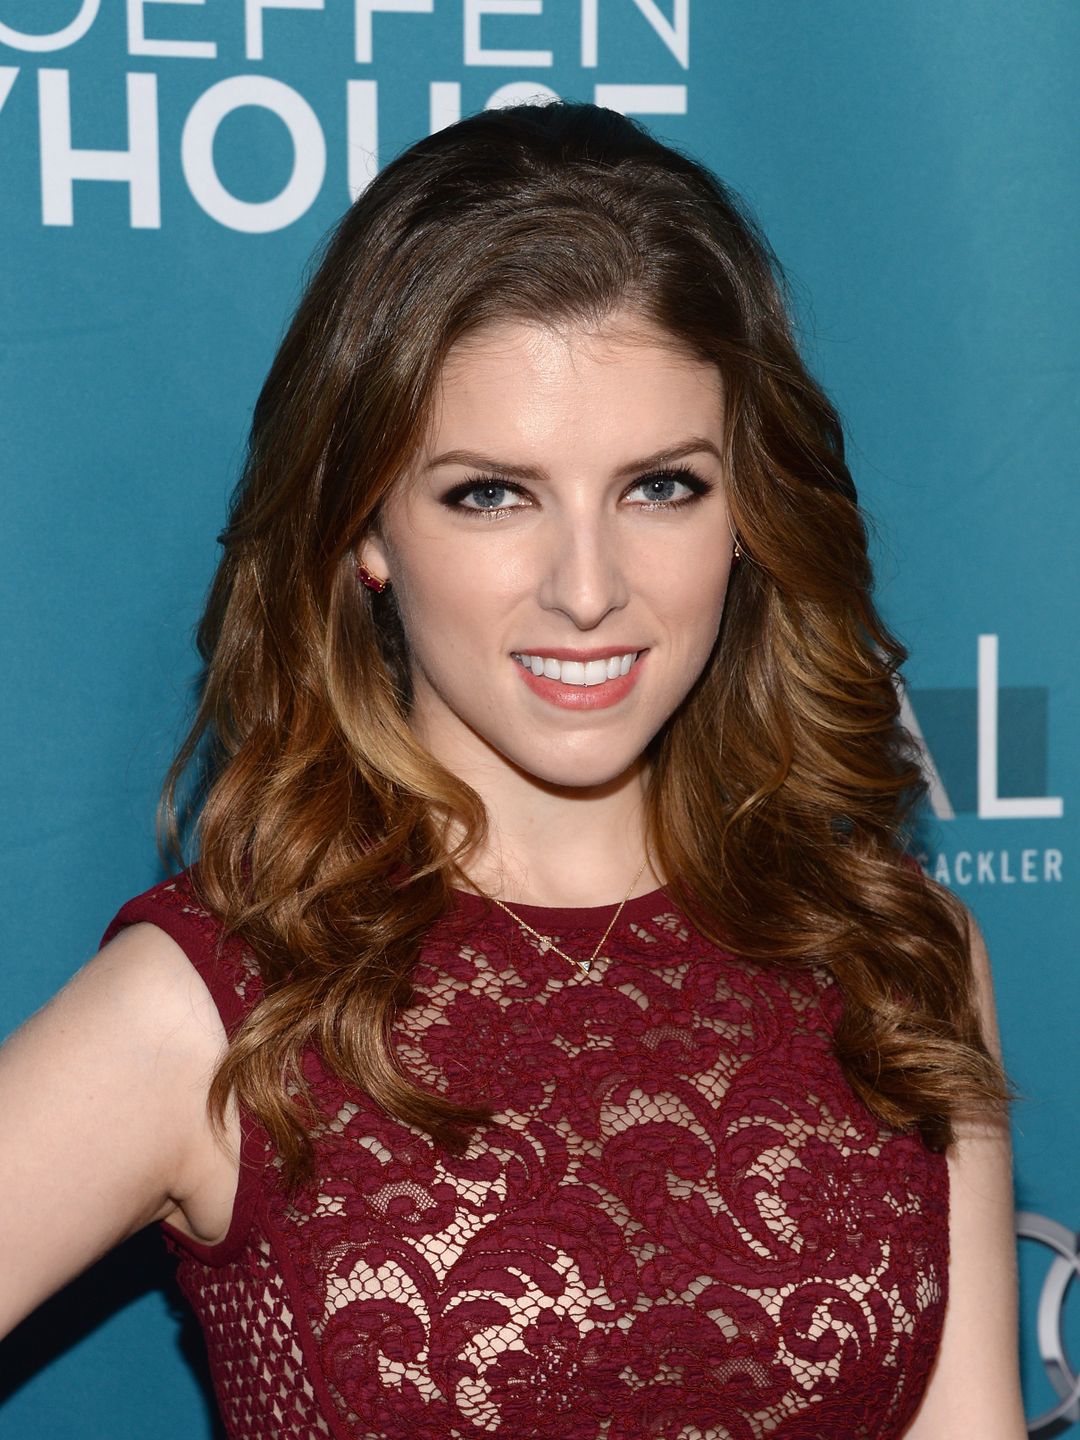 Anna Kendrick how old is she